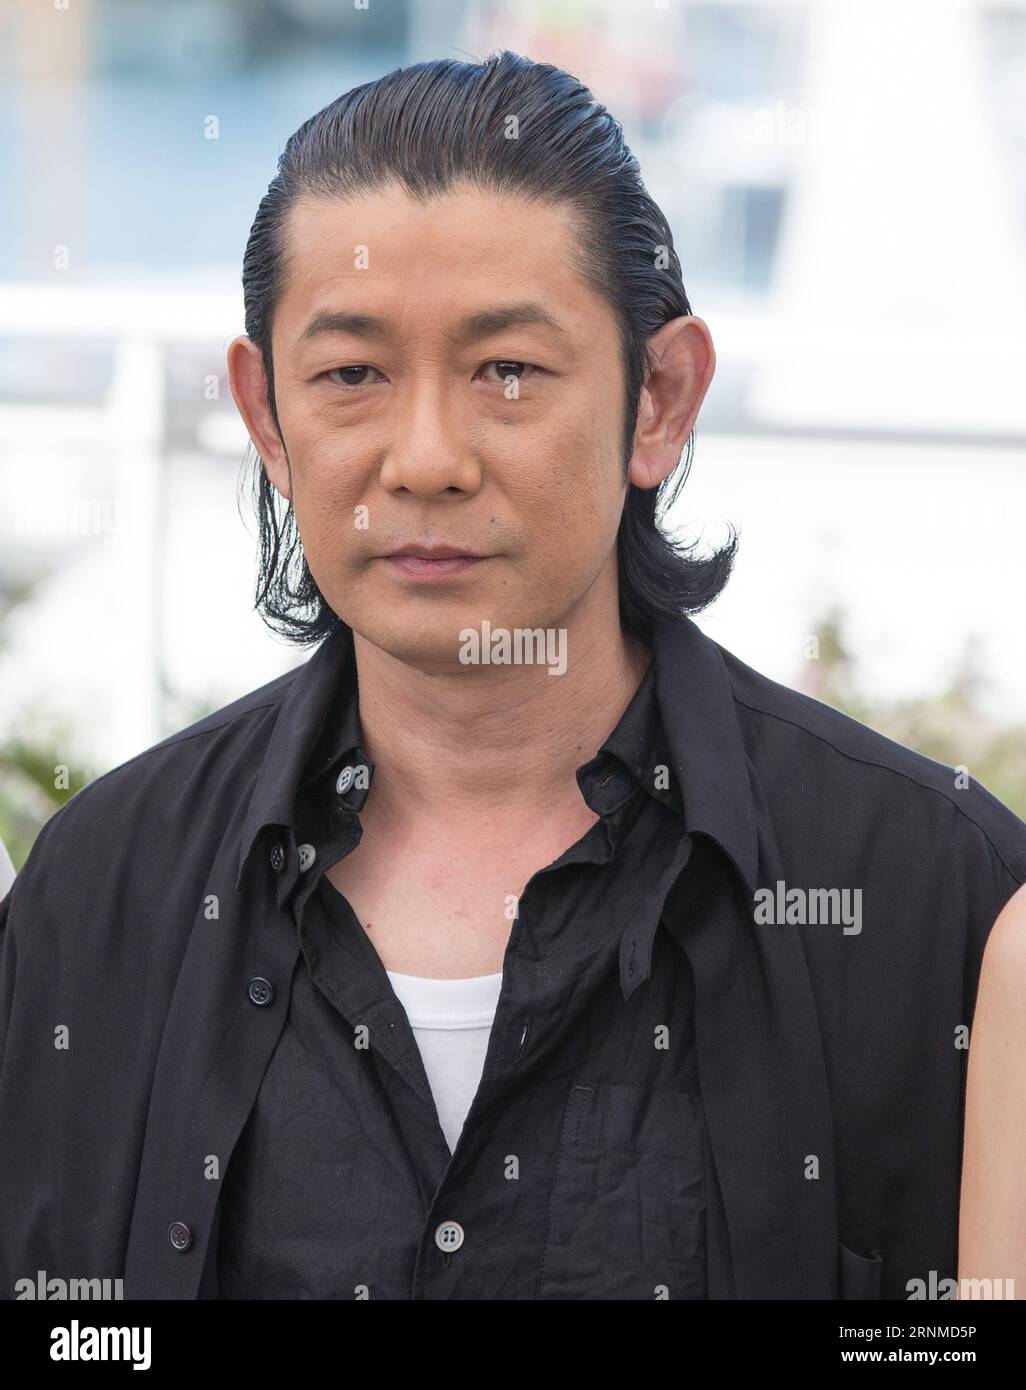 (170523) -- CANNES, May 23, 2017 -- Actor Masatoshi Nagase poses for a photocall of the film Hikari (Radiance) during the 70th Cannes Film Festival at Palais des Festivals in Cannes, France, on May 23, 2017. ) (dtf) FRANCE-CANNES-70TH CANNES FILM FESTIVAL-HIKARI XuxJinquan PUBLICATIONxNOTxINxCHN   Cannes May 23 2017 Actor Masatoshi NAGASE Poses for a photo call of The Film Hikari Radiance during The 70th Cannes Film Festival AT Palais the Festivals in Cannes France ON May 23 2017 dtf France Cannes 70th Cannes Film Festival Hikari XuxJinquan PUBLICATIONxNOTxINxCHN Stock Photo